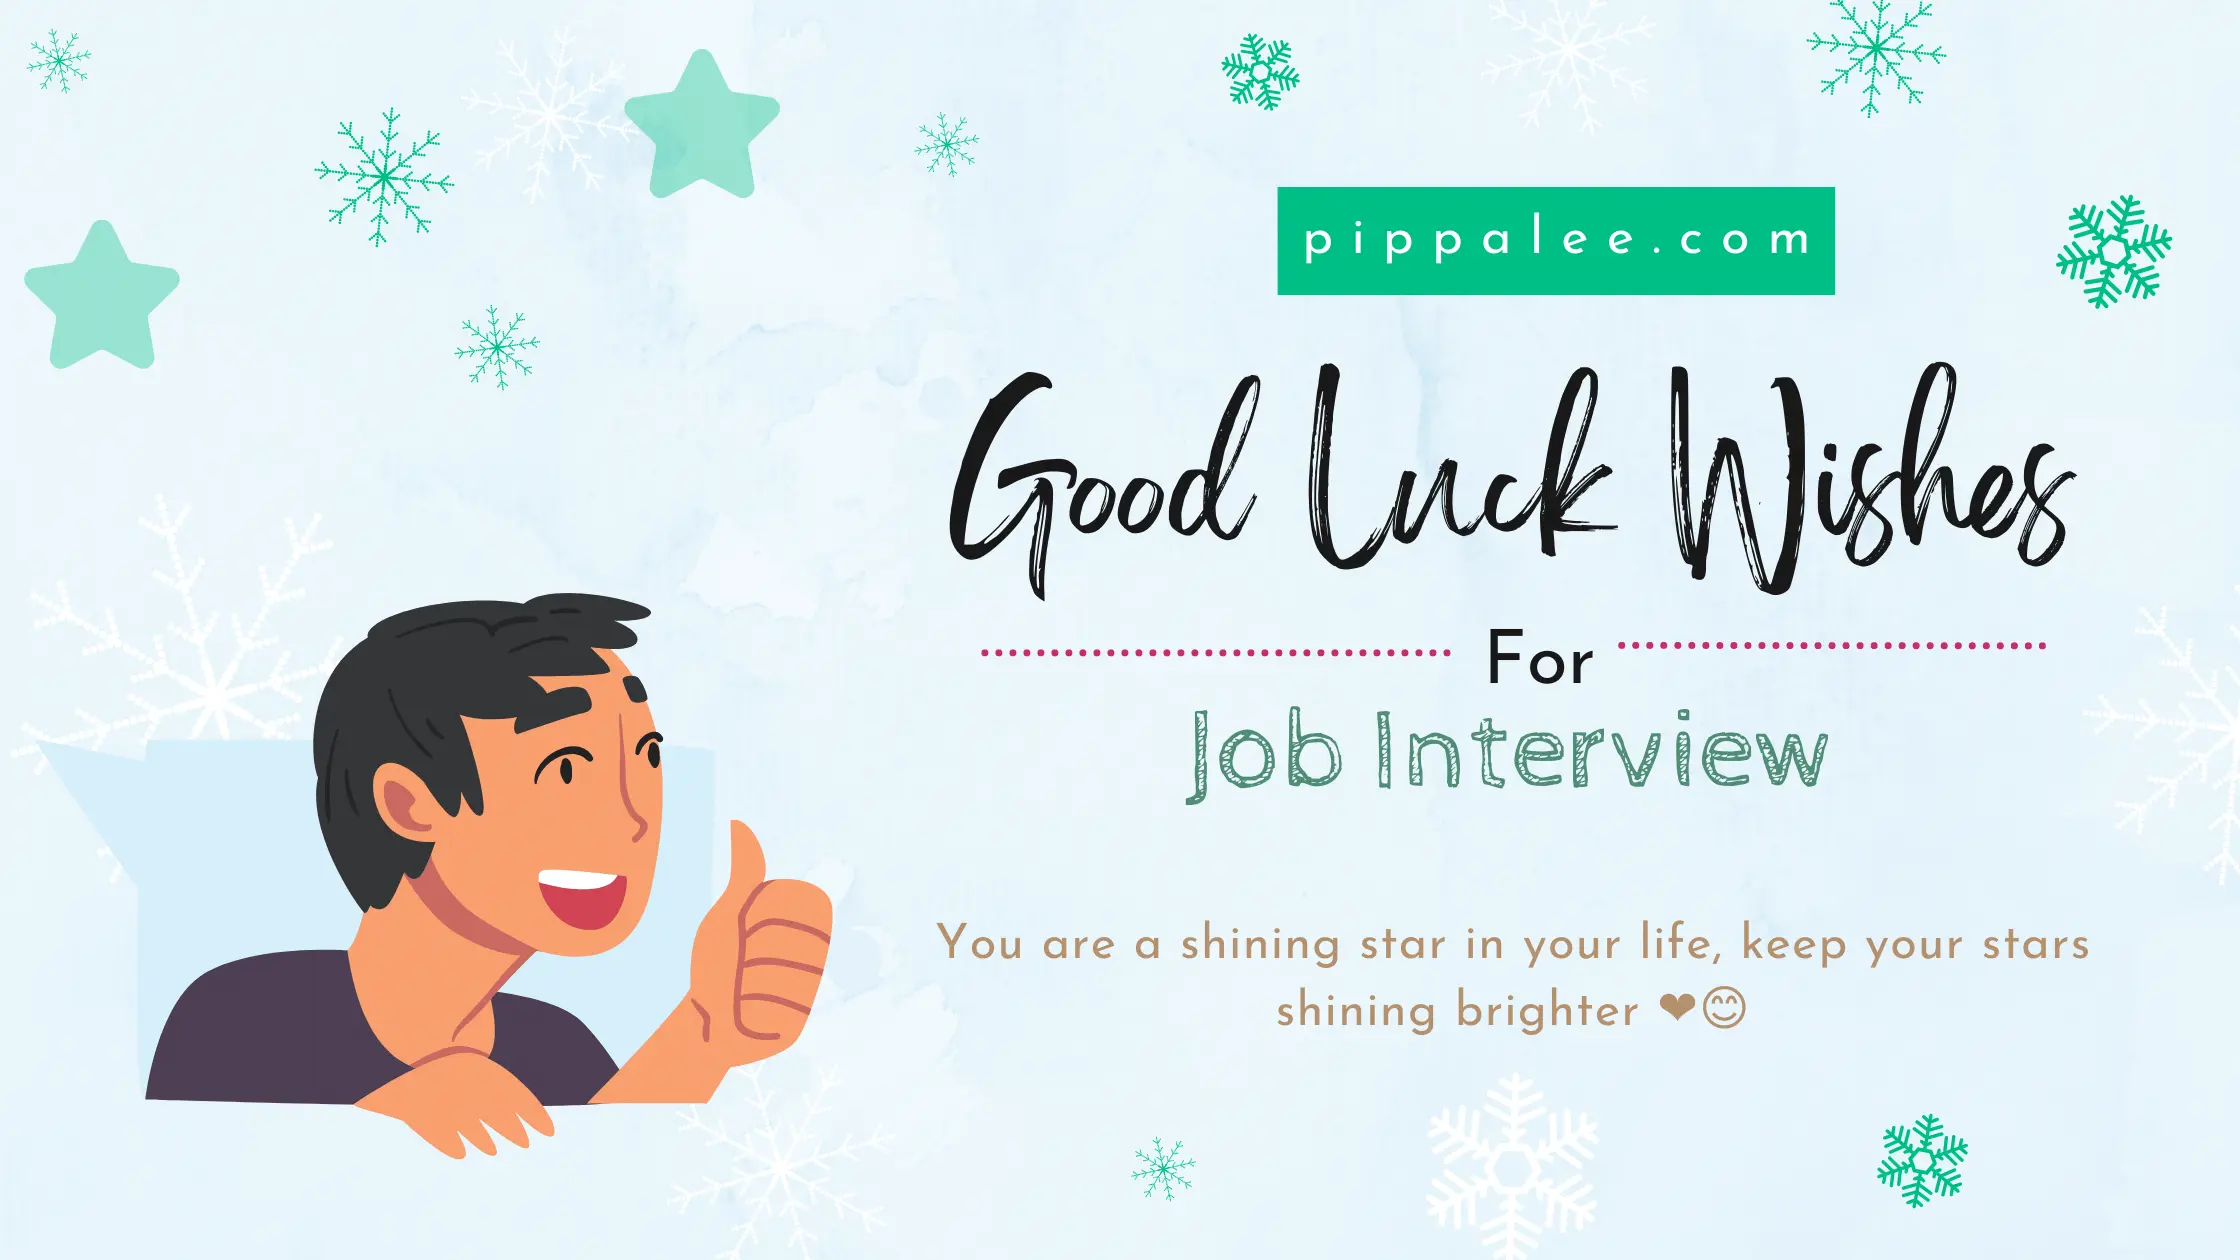 Good Luck Wishes for Job Interview - Ultimate List of Wishes